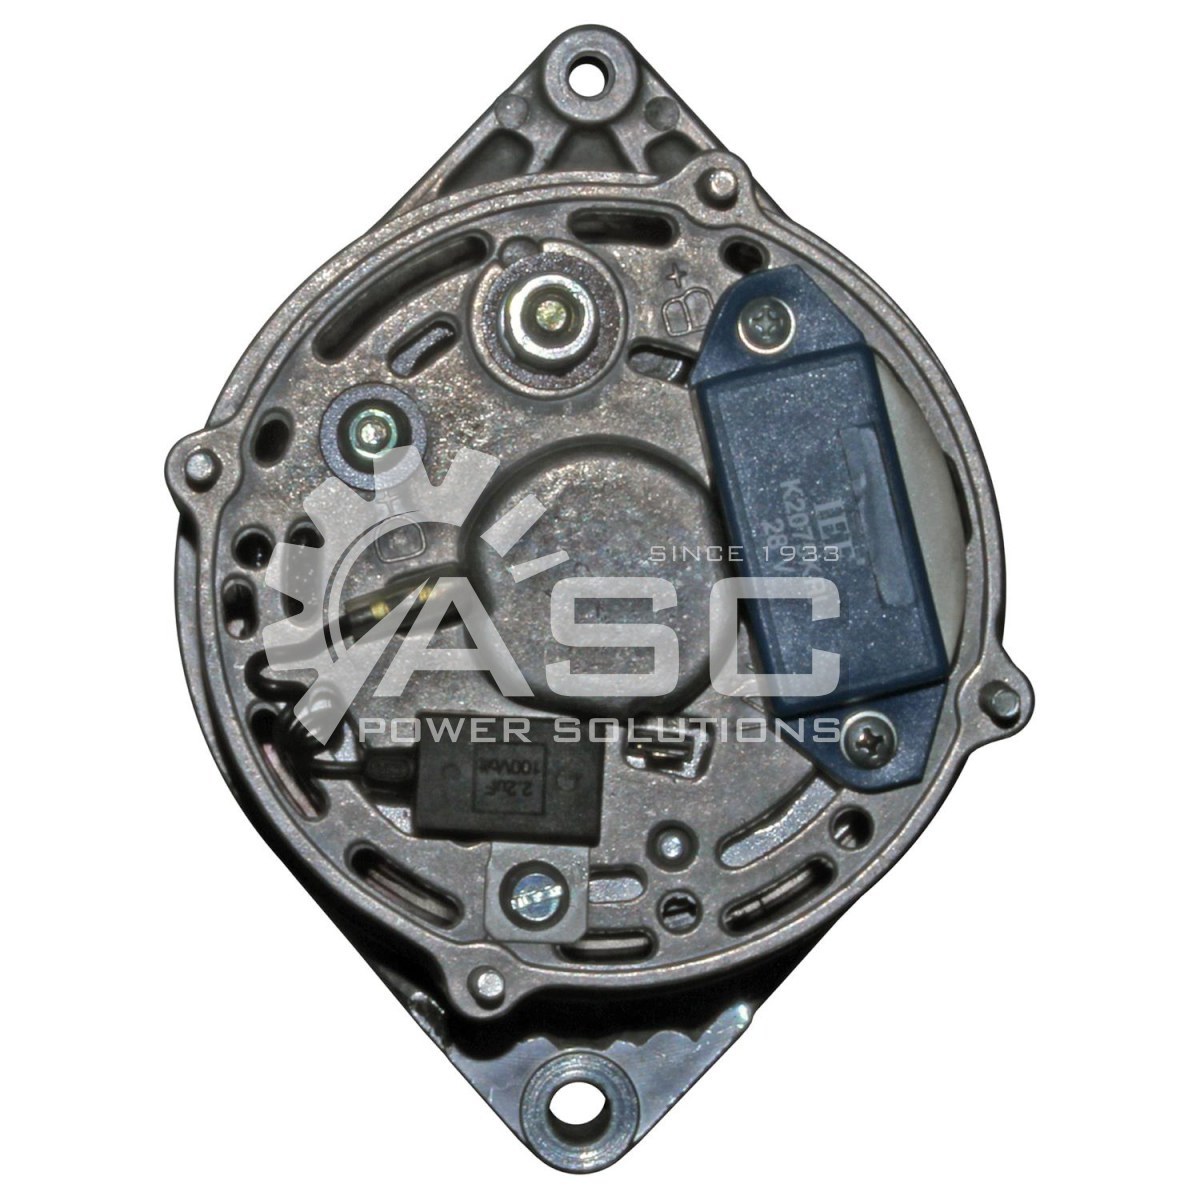 A241412_REMAN ASC POWER SOLUTIONS BOSCH ALTERNATOR FOR CASE AND FORD AGRICULTURE APPLICATIONS 24V 45AMP BI DIRECTIONAL